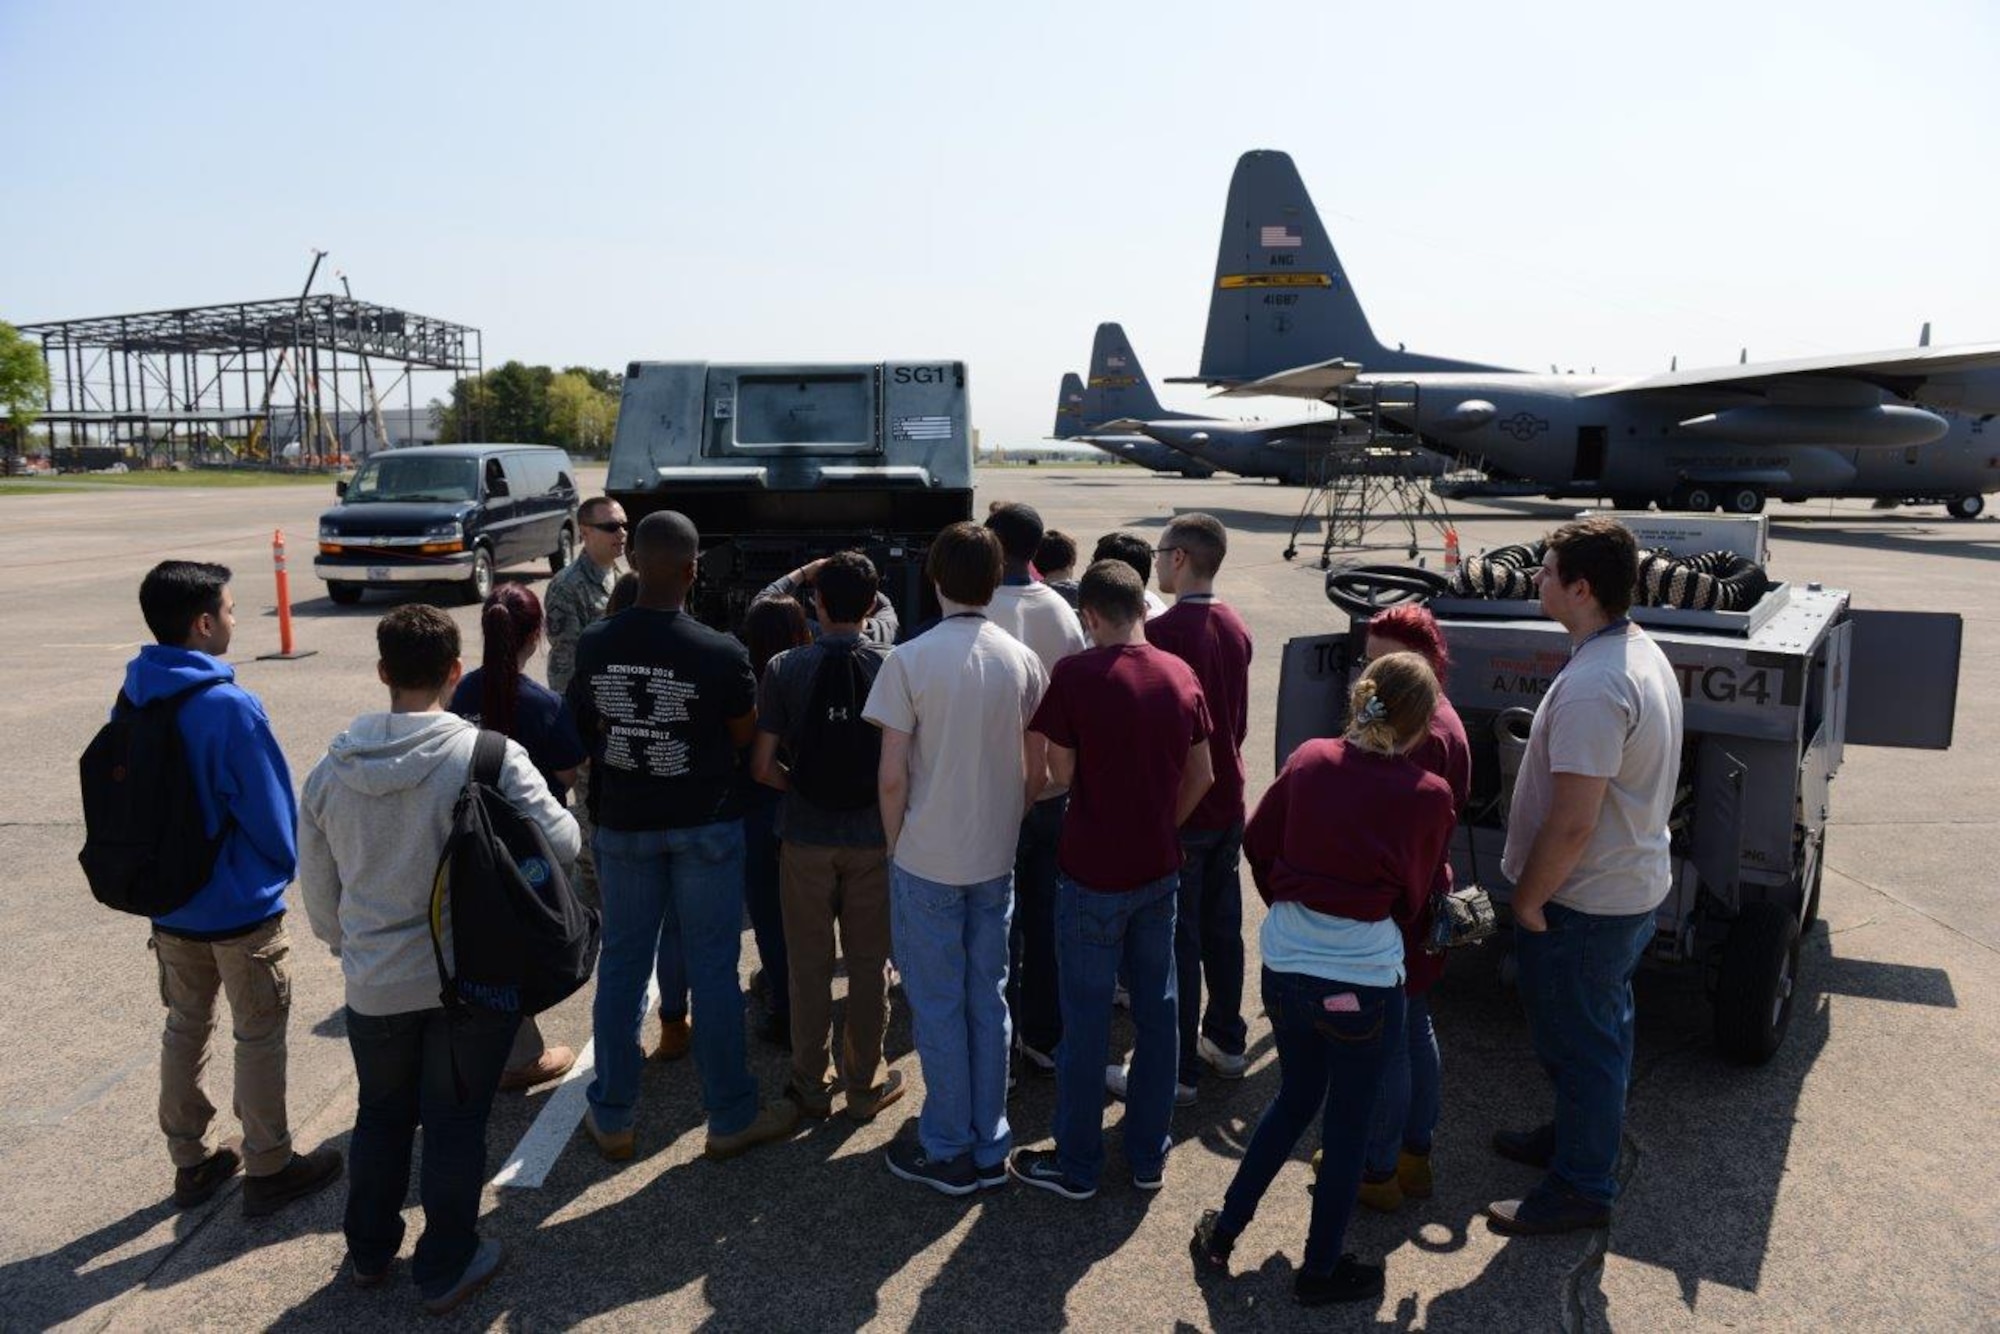 Master Sgt. Dennis Coughlin, aircraft ground equipment technician, explains the function and purpose of equipment to support flight mobility May 12, 2016, during a Career Day hosted at Bradley Air National Guard Base, East Granby, Conn. Students discussed military careers with Air National Guardsmen during their visit to the 103rd Airlift Wing. (U.S. Air Force photo by Master Sgt. Erin McNamara)